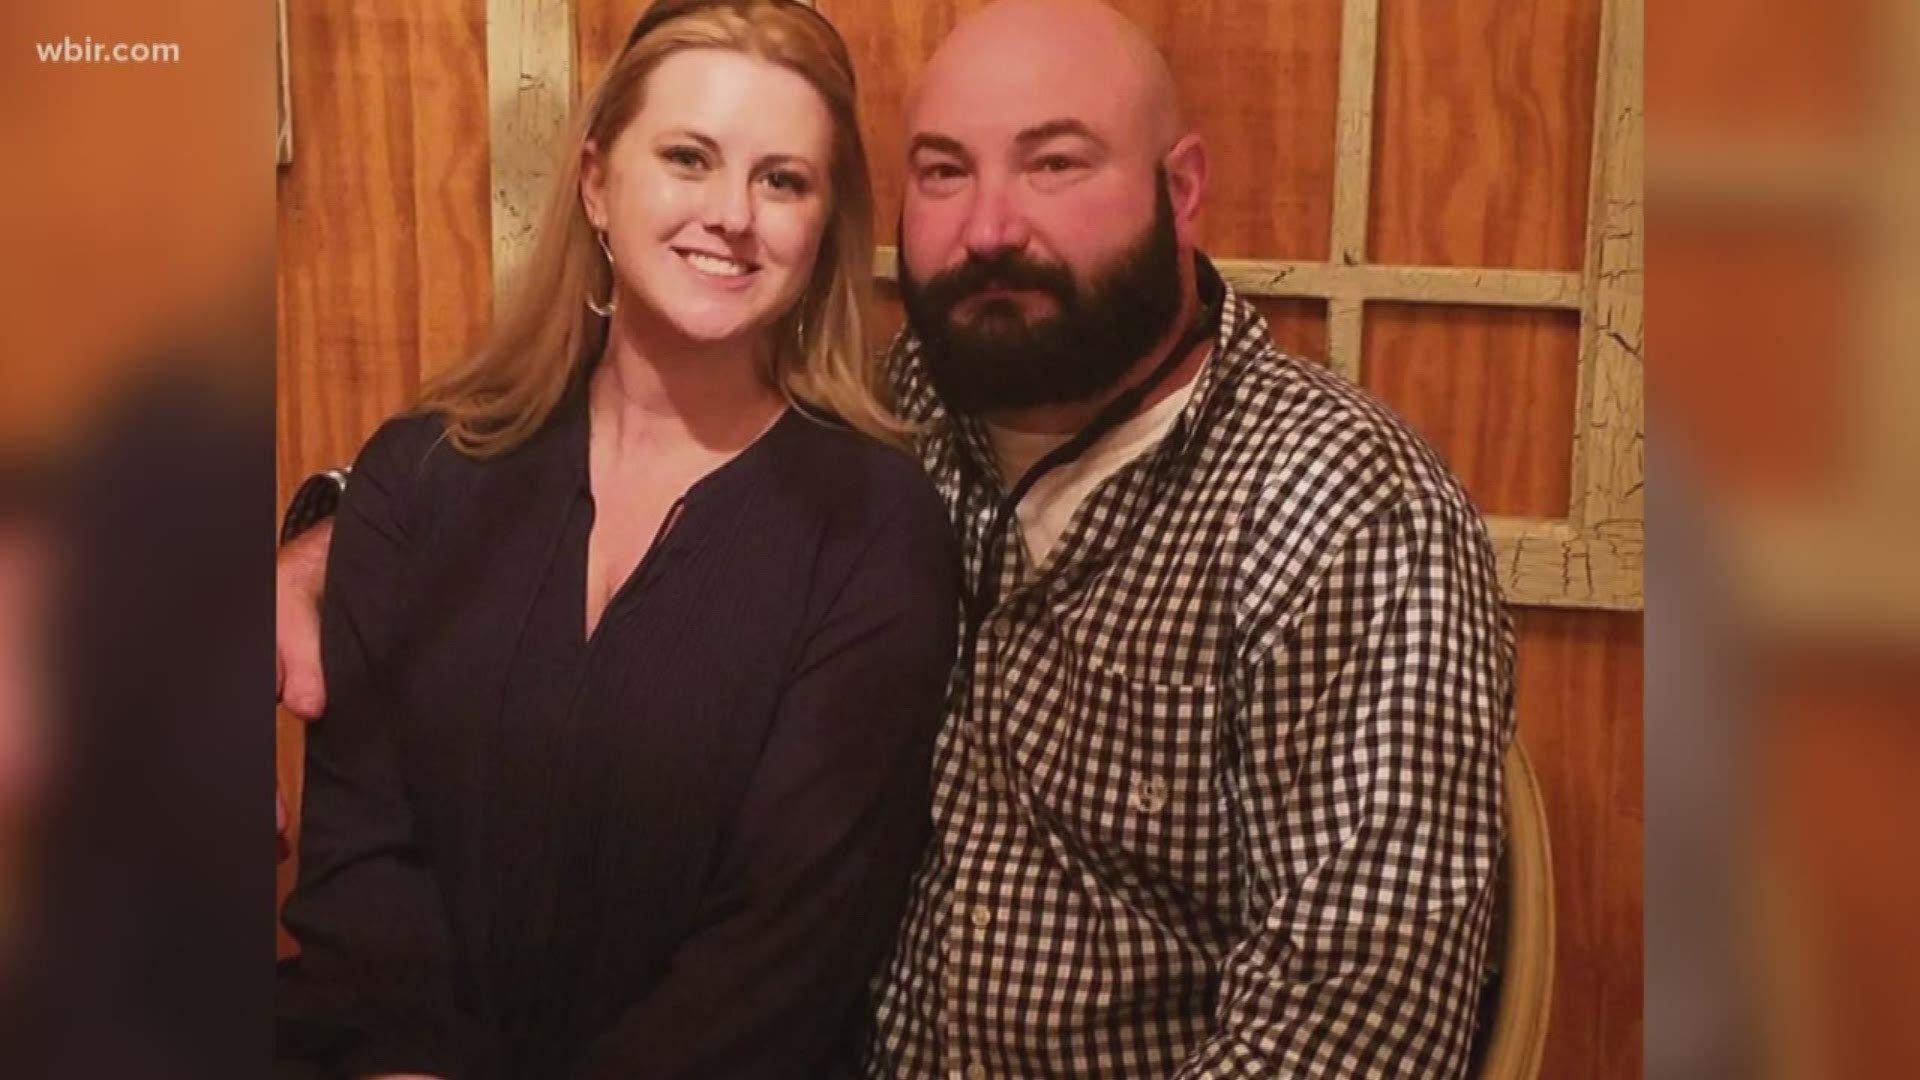 Police said James "Chip" Smith was killed after his wife Melissa Smith, shot him Saturday at the Sevierville visitor center. He was a Red Bank police officer.